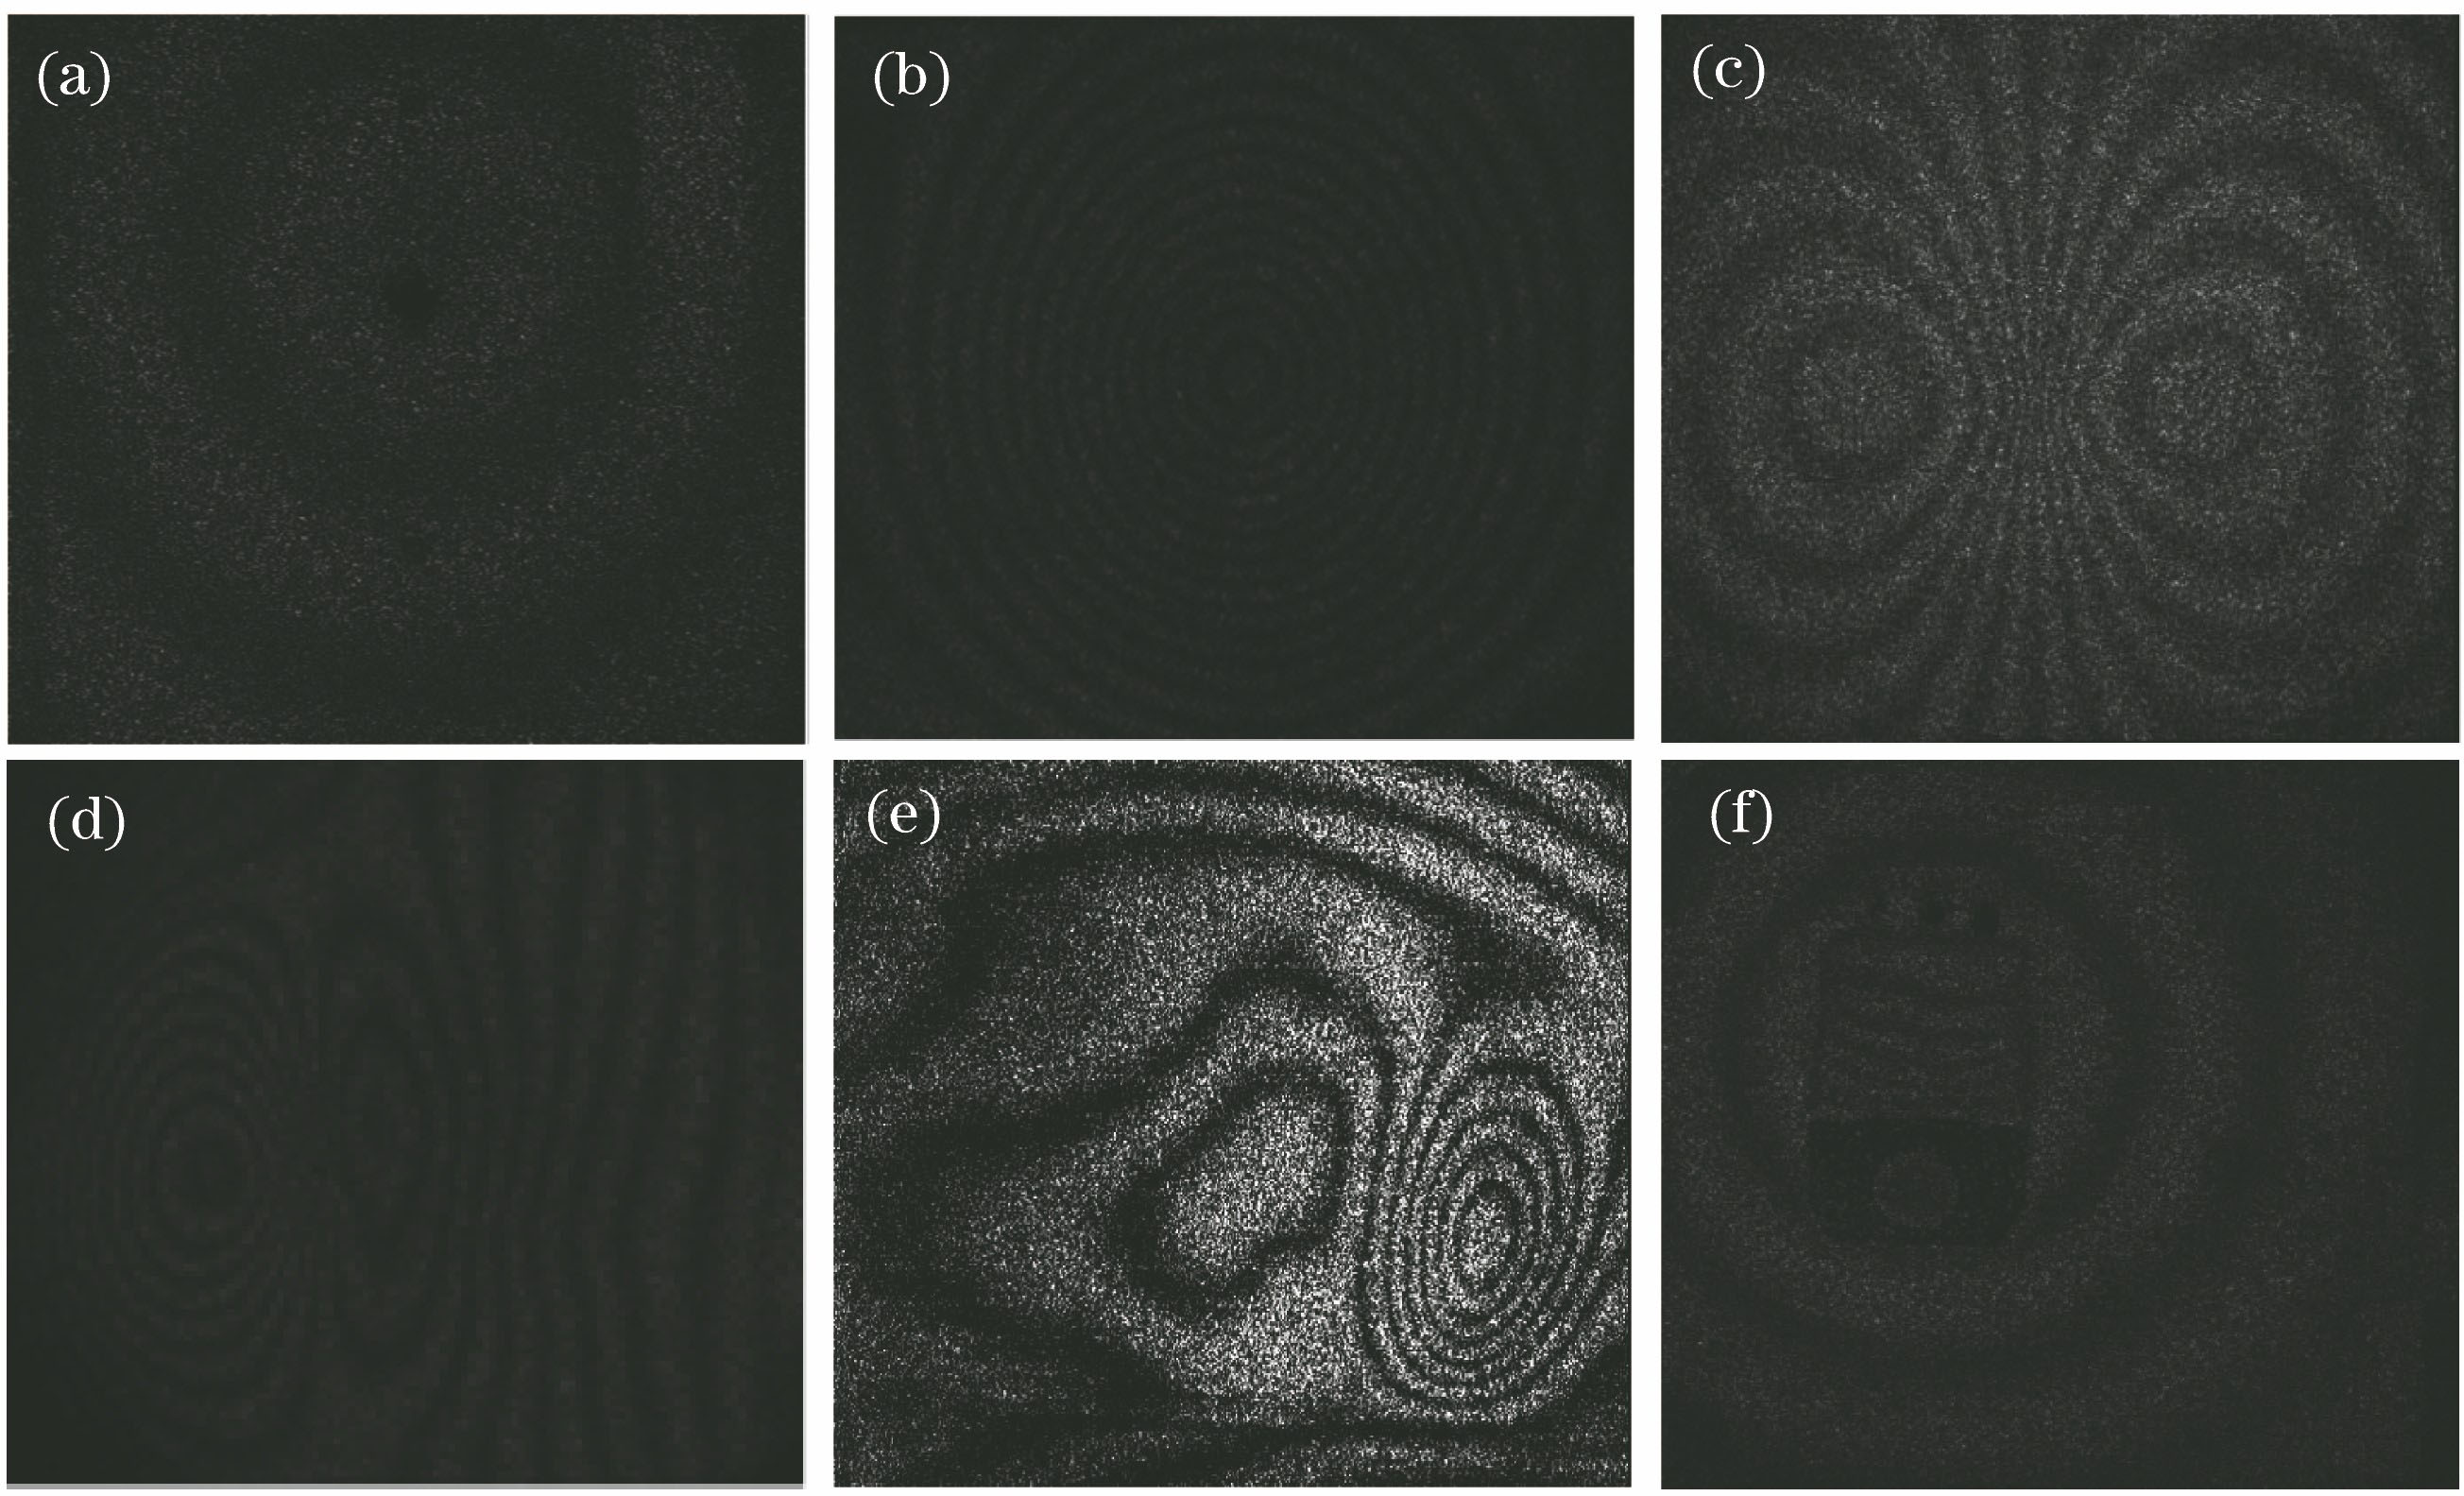 ESPI fringe images with various densities obtained in experiment. (a) Low-density fringe image; (b) high-density fringe image; (c)-(f) variable-density fringe images